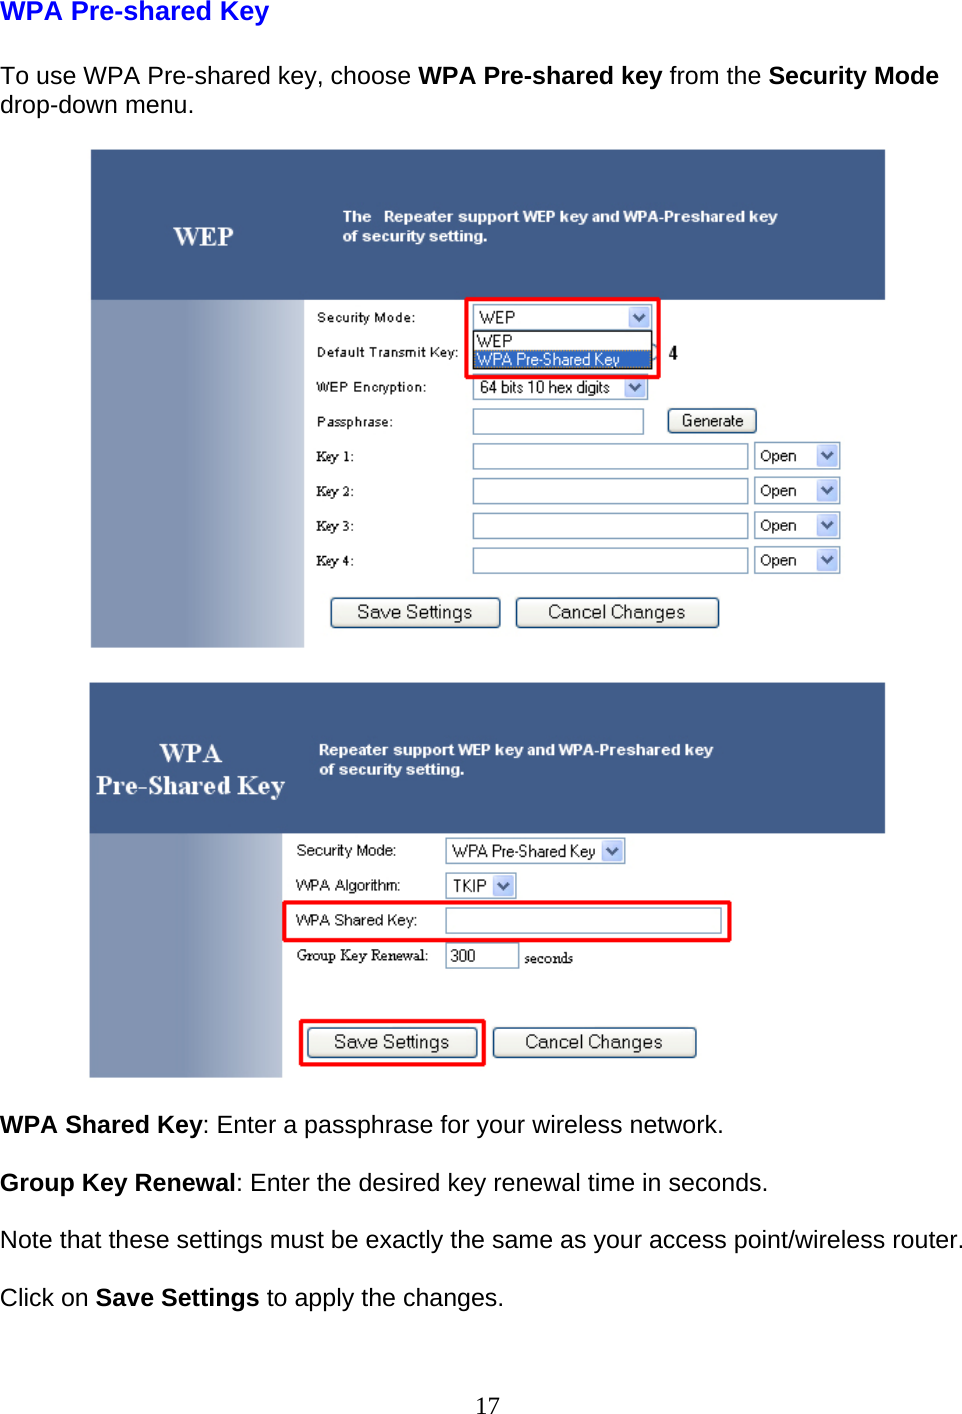 17 WPA Pre-shared Key  To use WPA Pre-shared key, choose WPA Pre-shared key from the Security Mode drop-down menu.       WPA Shared Key: Enter a passphrase for your wireless network.  Group Key Renewal: Enter the desired key renewal time in seconds.  Note that these settings must be exactly the same as your access point/wireless router.  Click on Save Settings to apply the changes.  